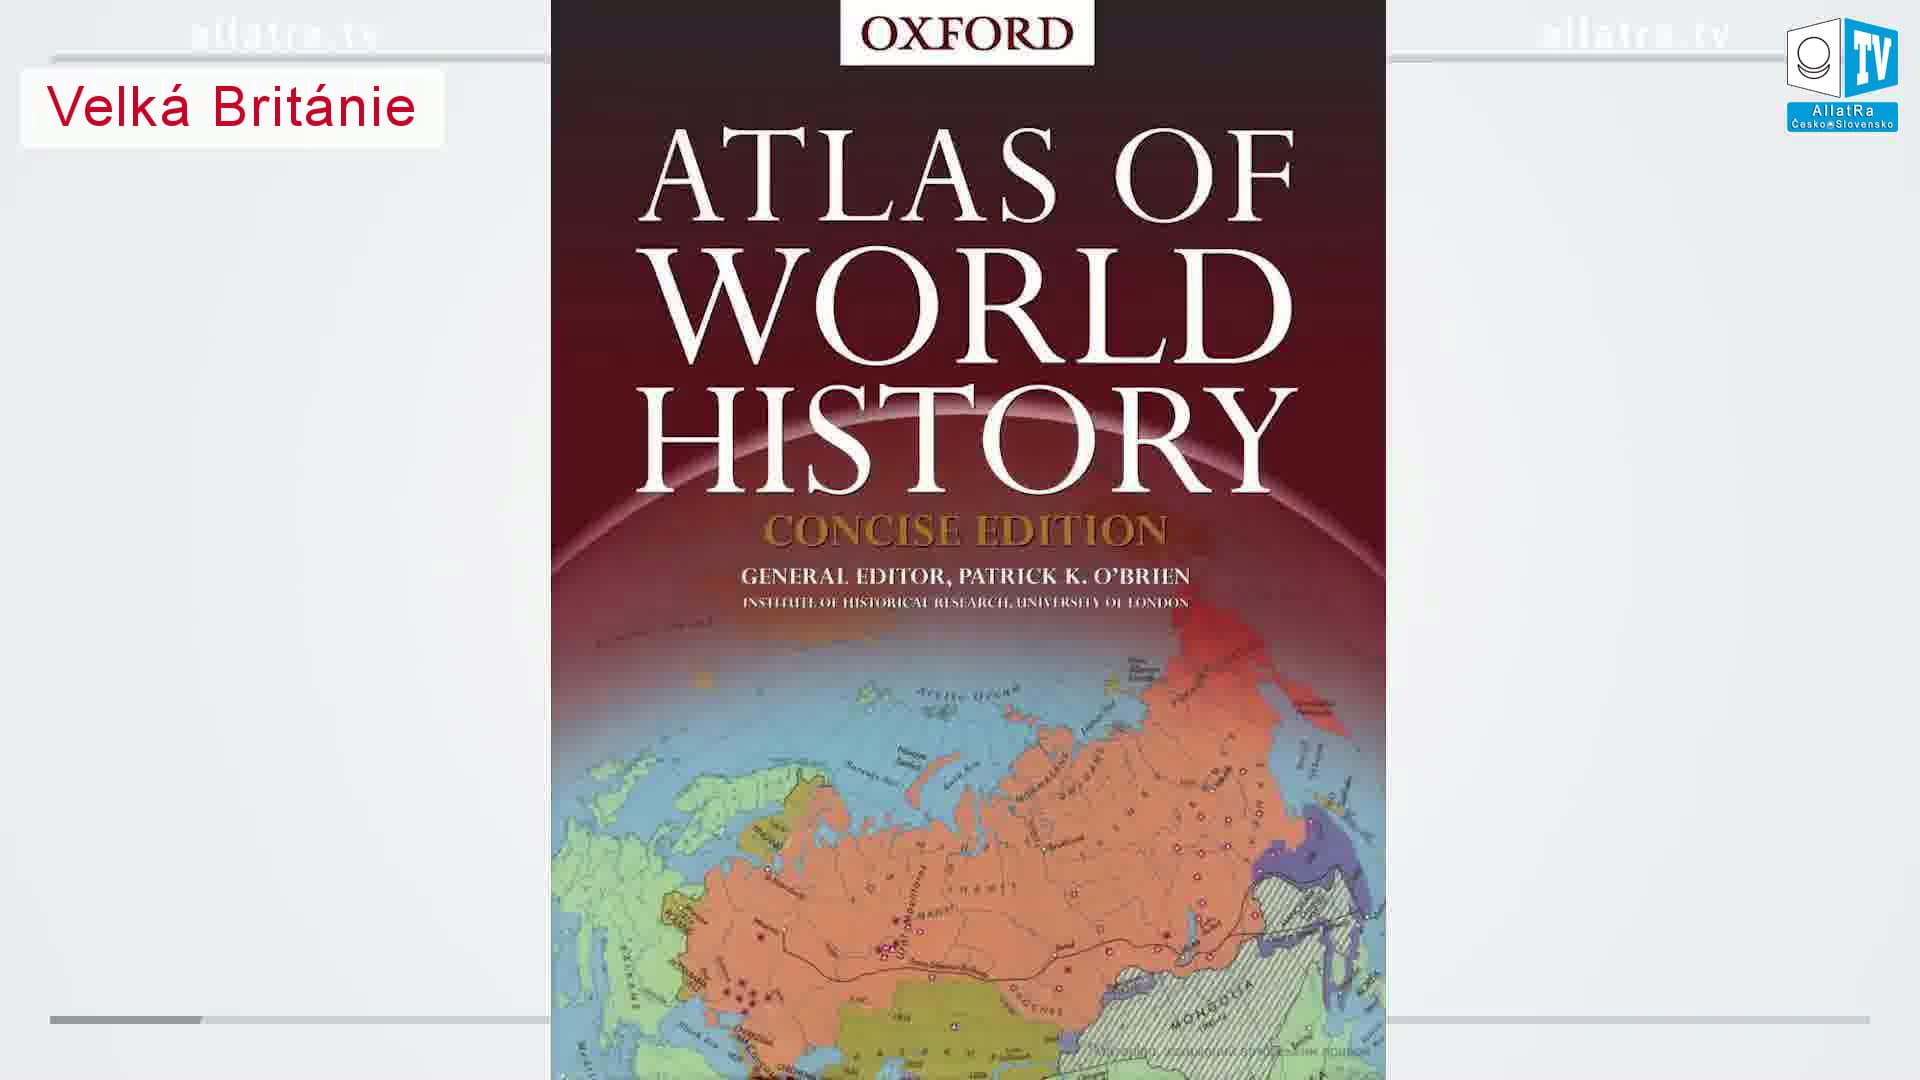 Atlas of the world history. Oxford